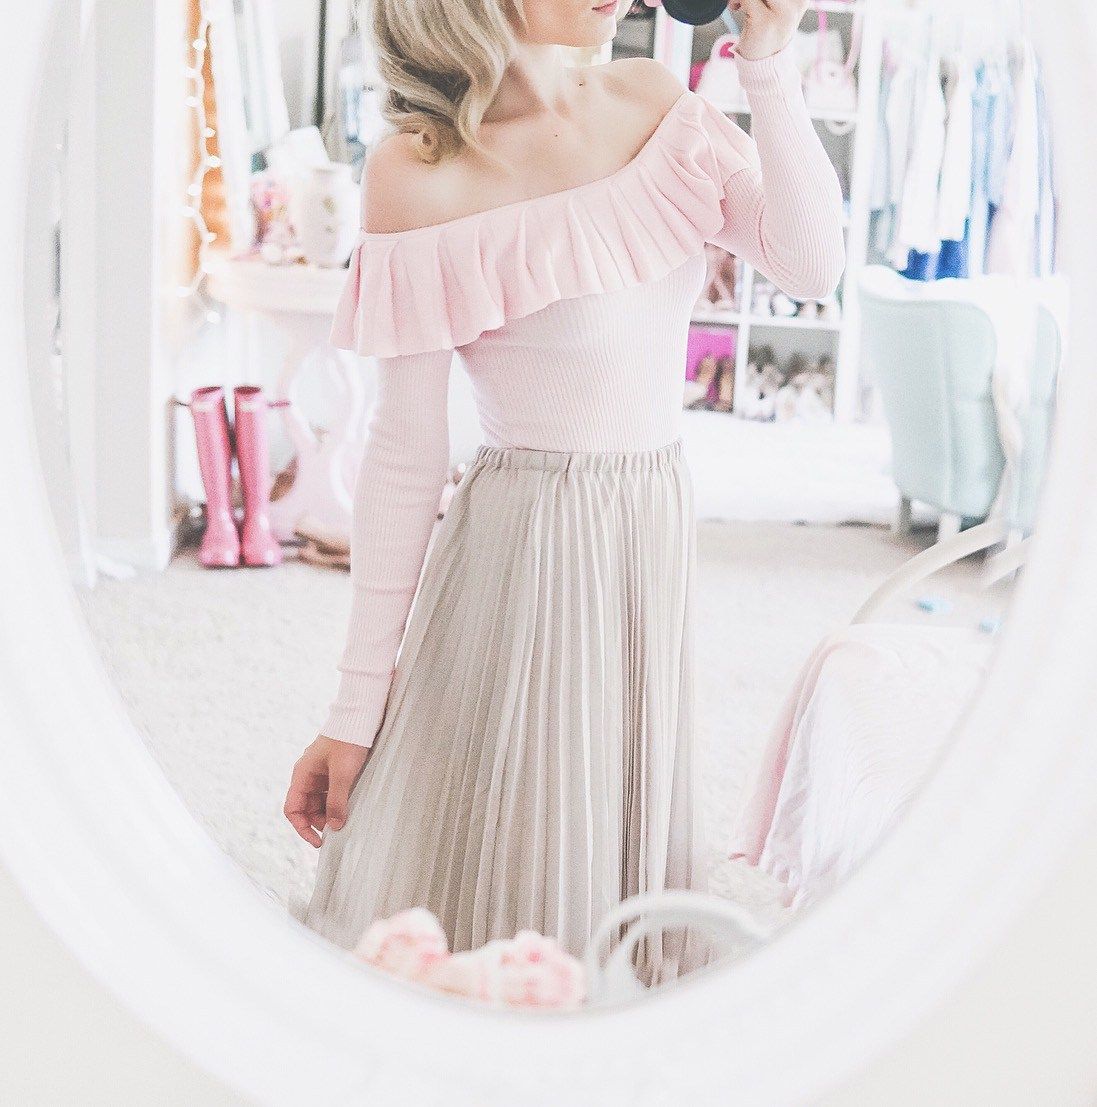 Feminine Style & Current Trends with LC Lauren Conrad - Feminine Style & Current Trends with LC Lauren Conrad -   9 girly style Romantic ideas